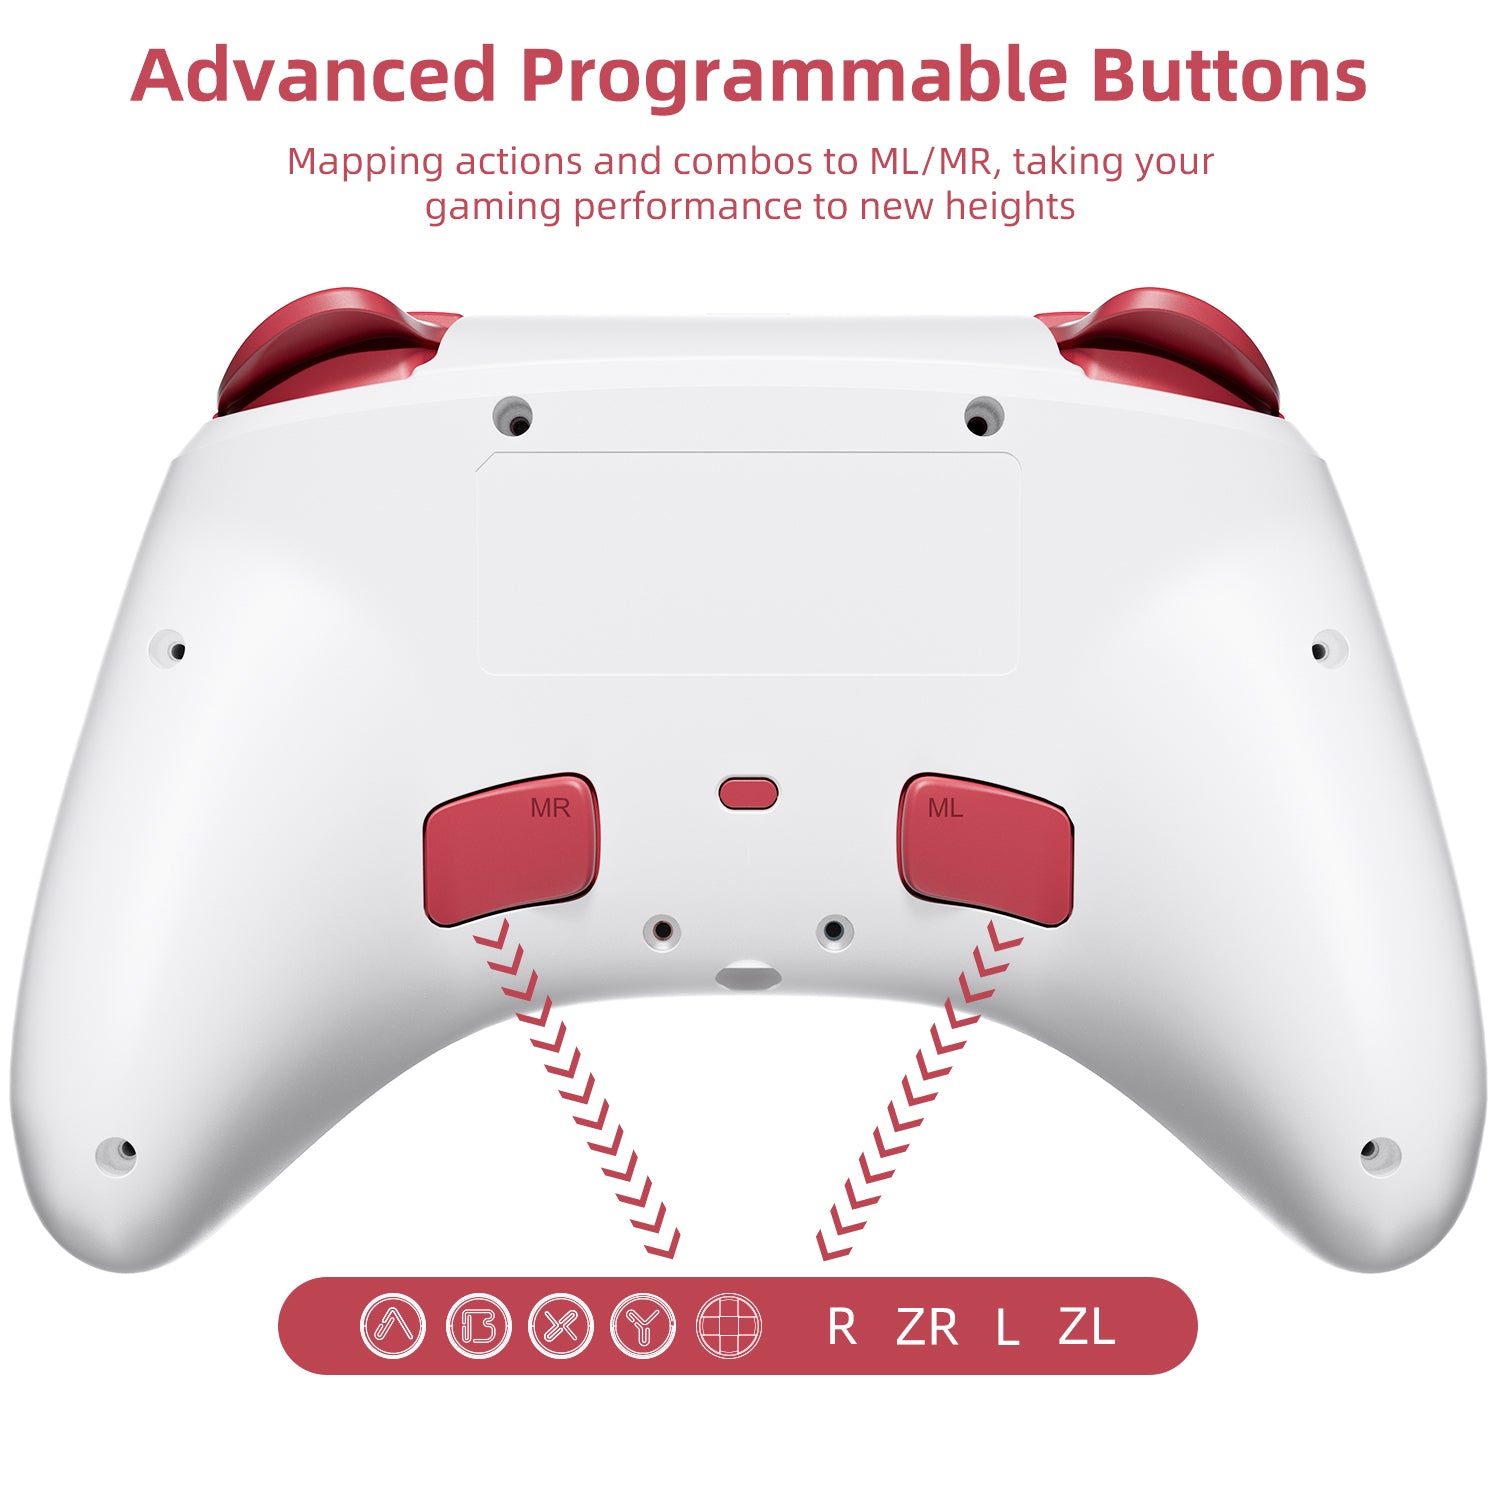 Custom Nintendo Switch Pro Controller in Sakura Pink With White Buttons 